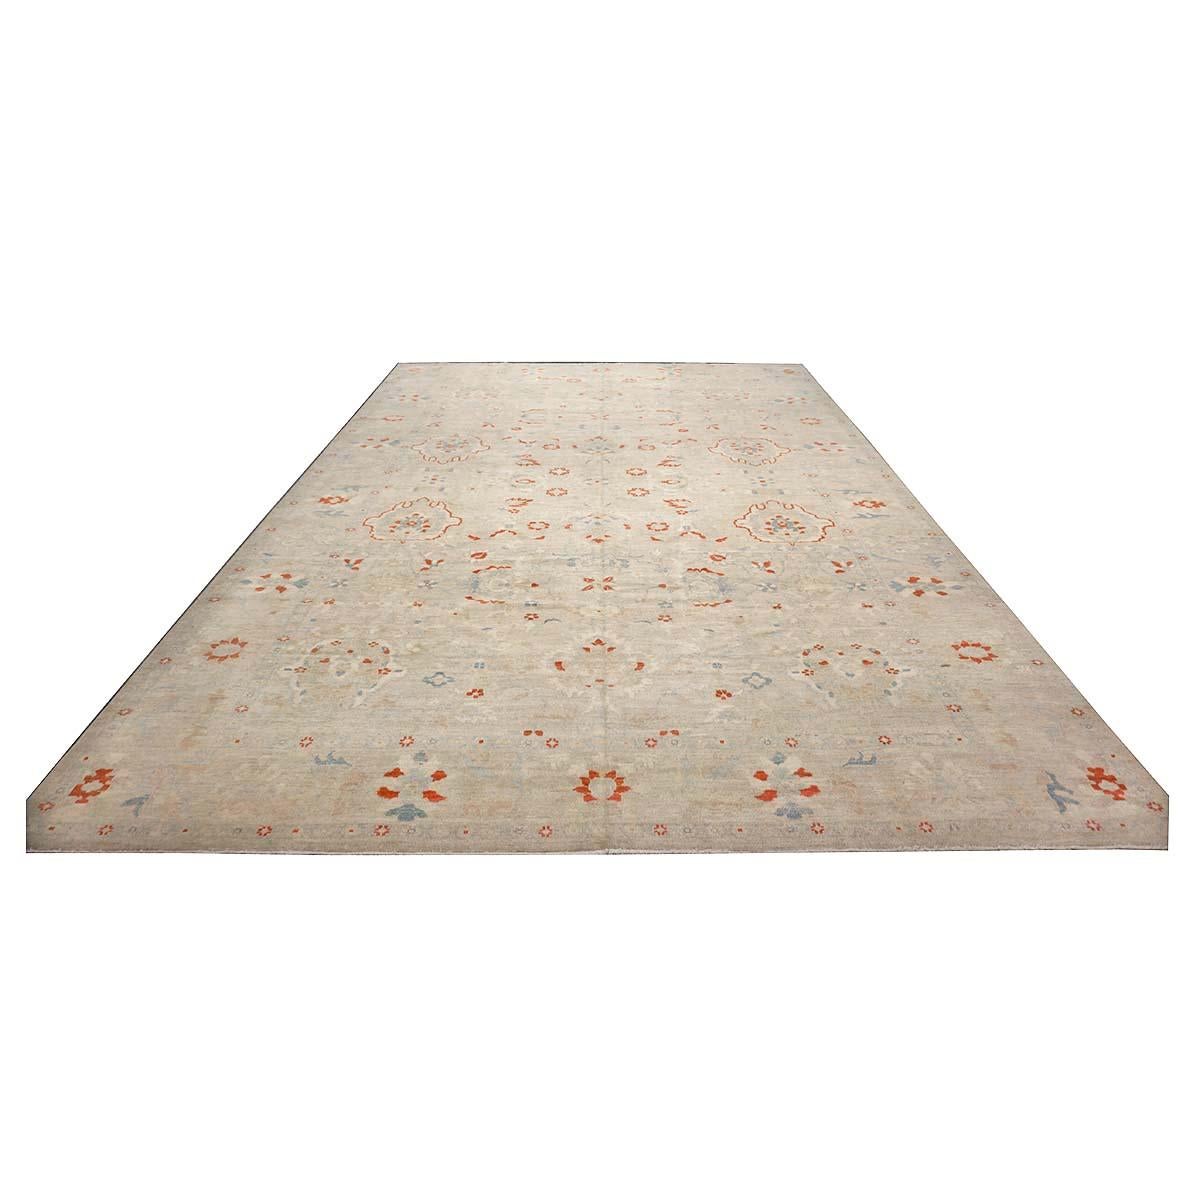  Ashly Fine Rugs presents an antique recreation of an original Persian Sultanabad. Part of our own, this antique recreation was thought of and designed in-house and 100% handmade in Turkey by master weavers. Sultanabads are perhaps the most desired